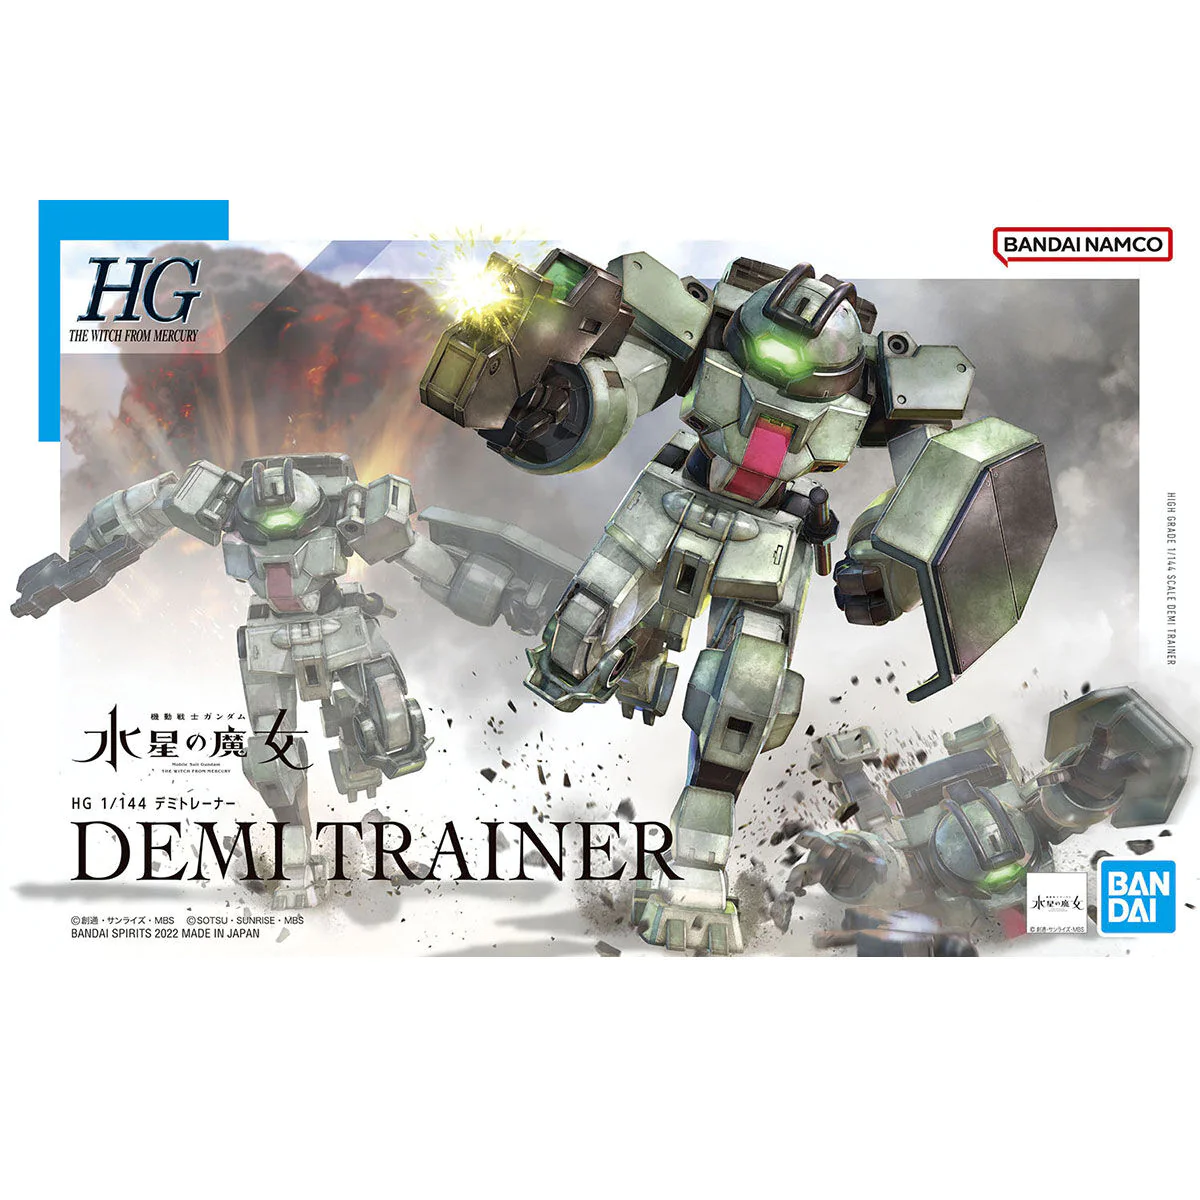 Demi Trainer - The Witch From Mercury (HG 1/144)